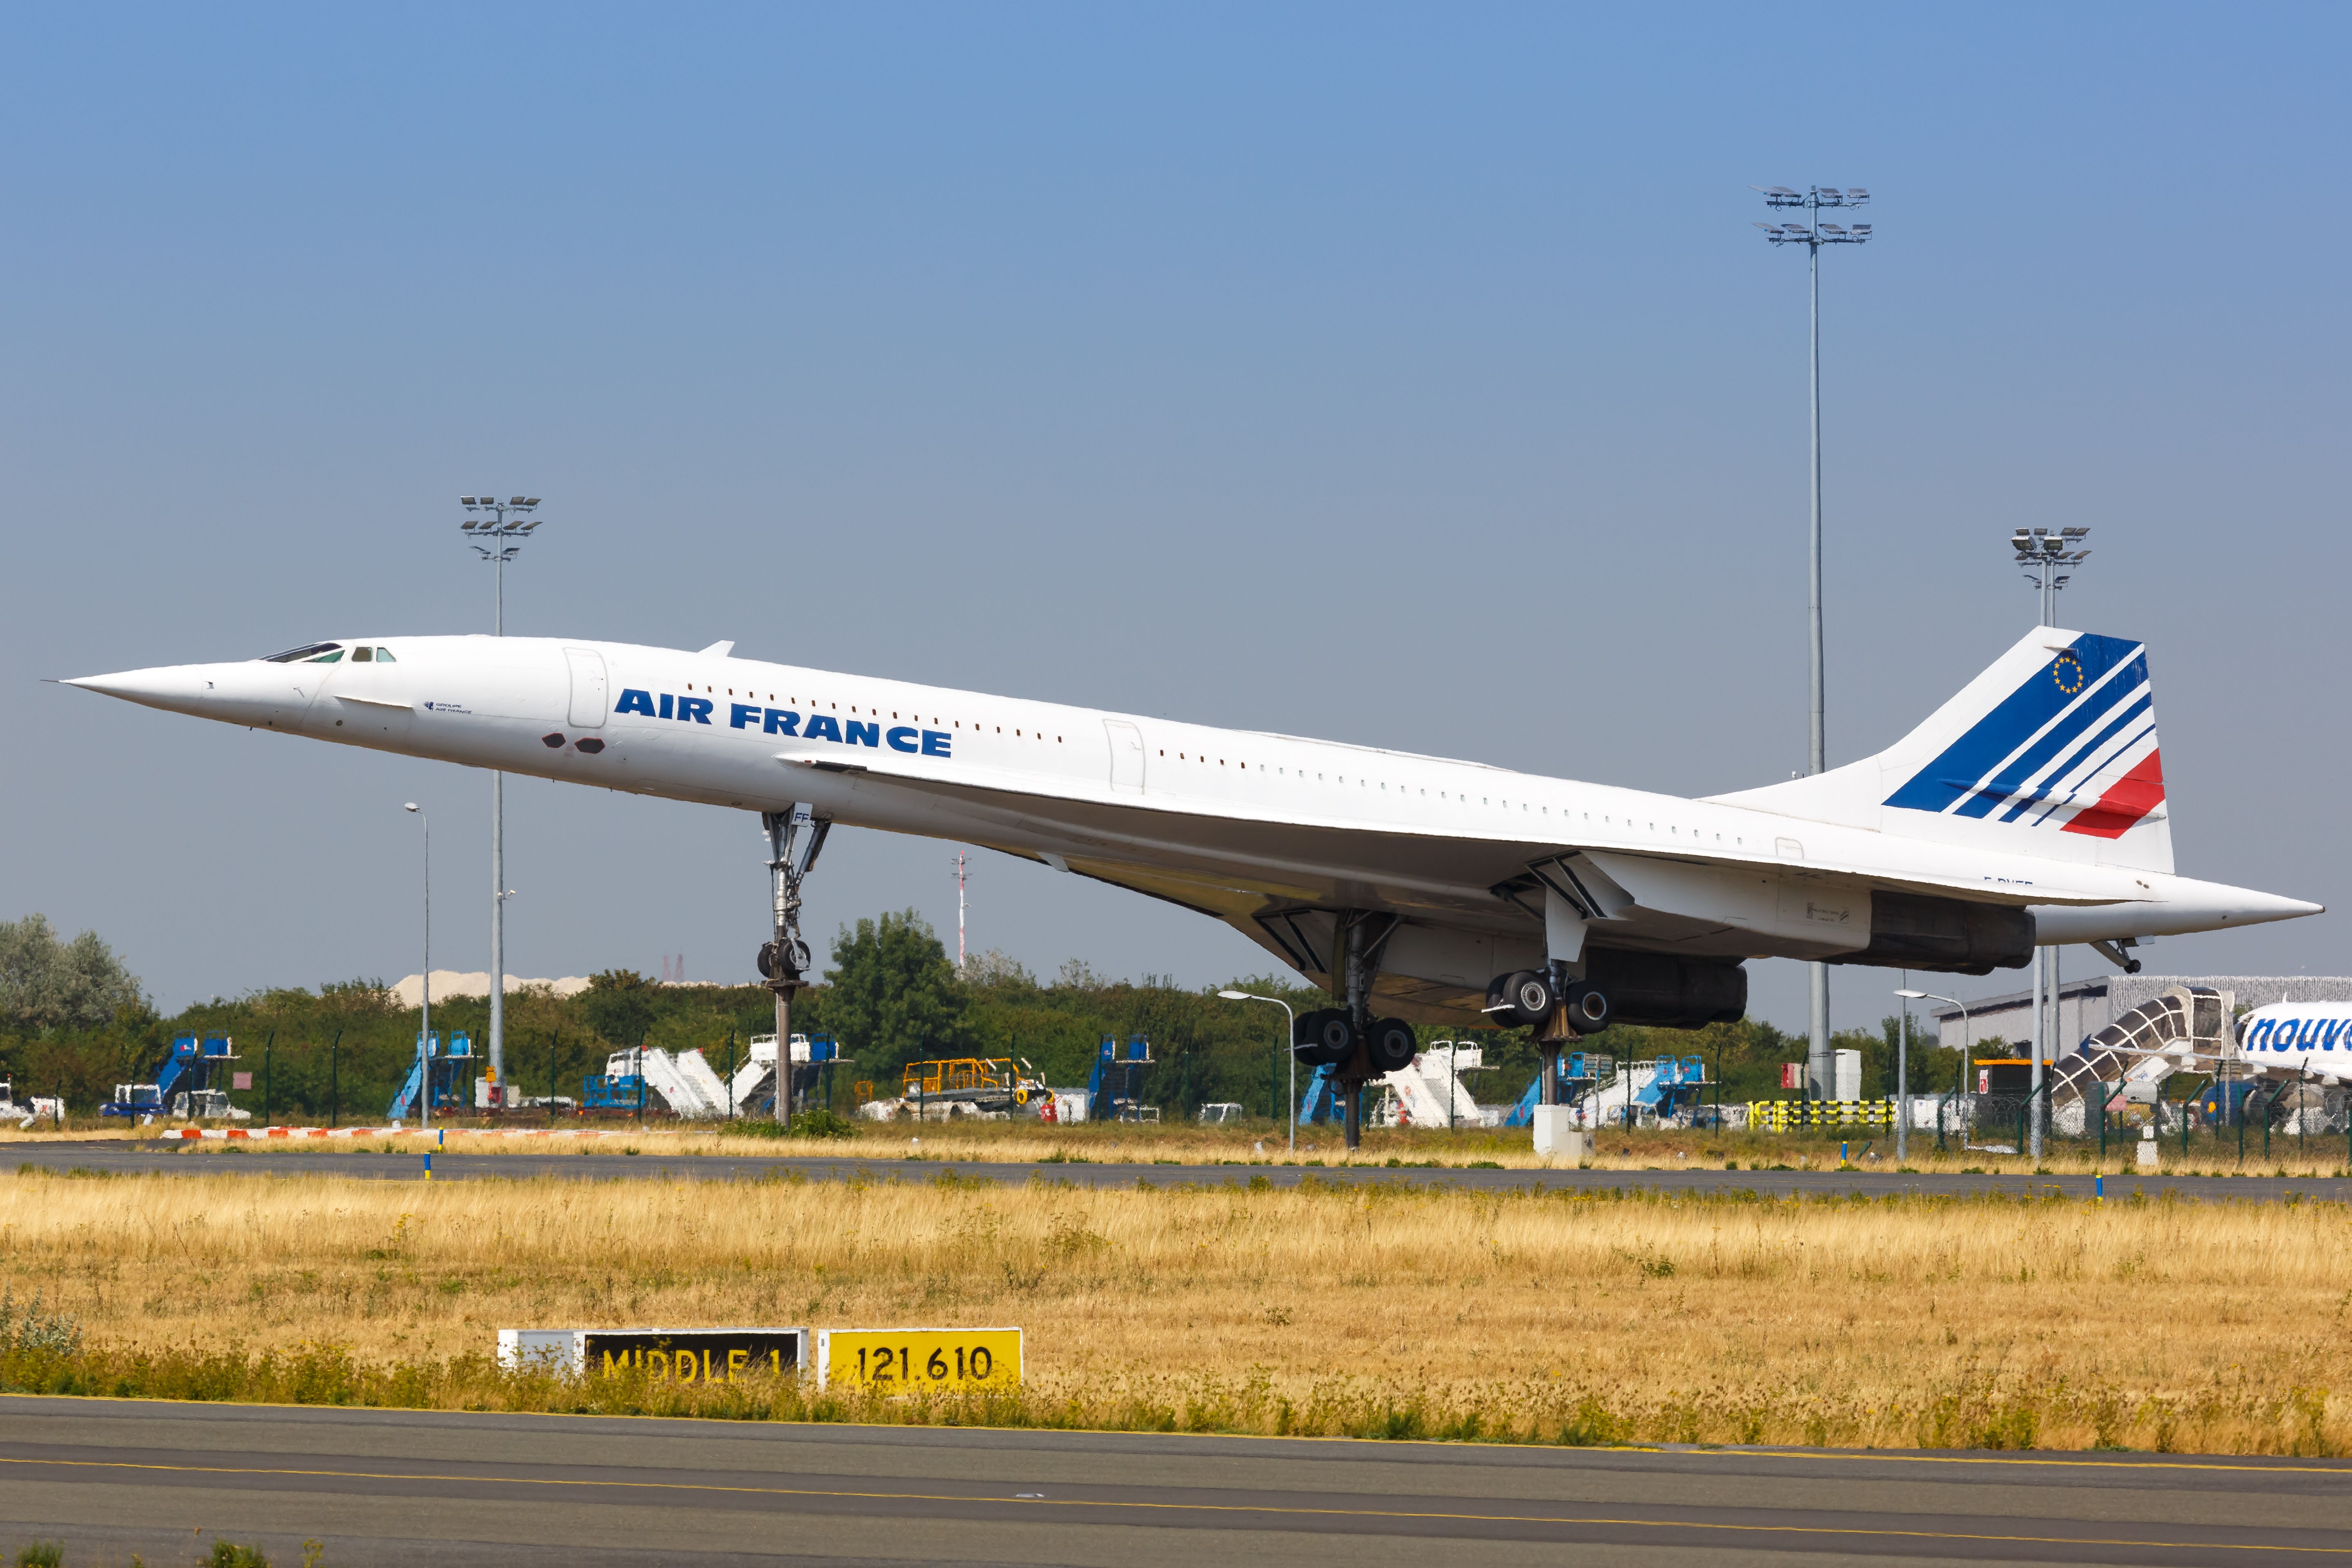 An Air France Concorde taking off.